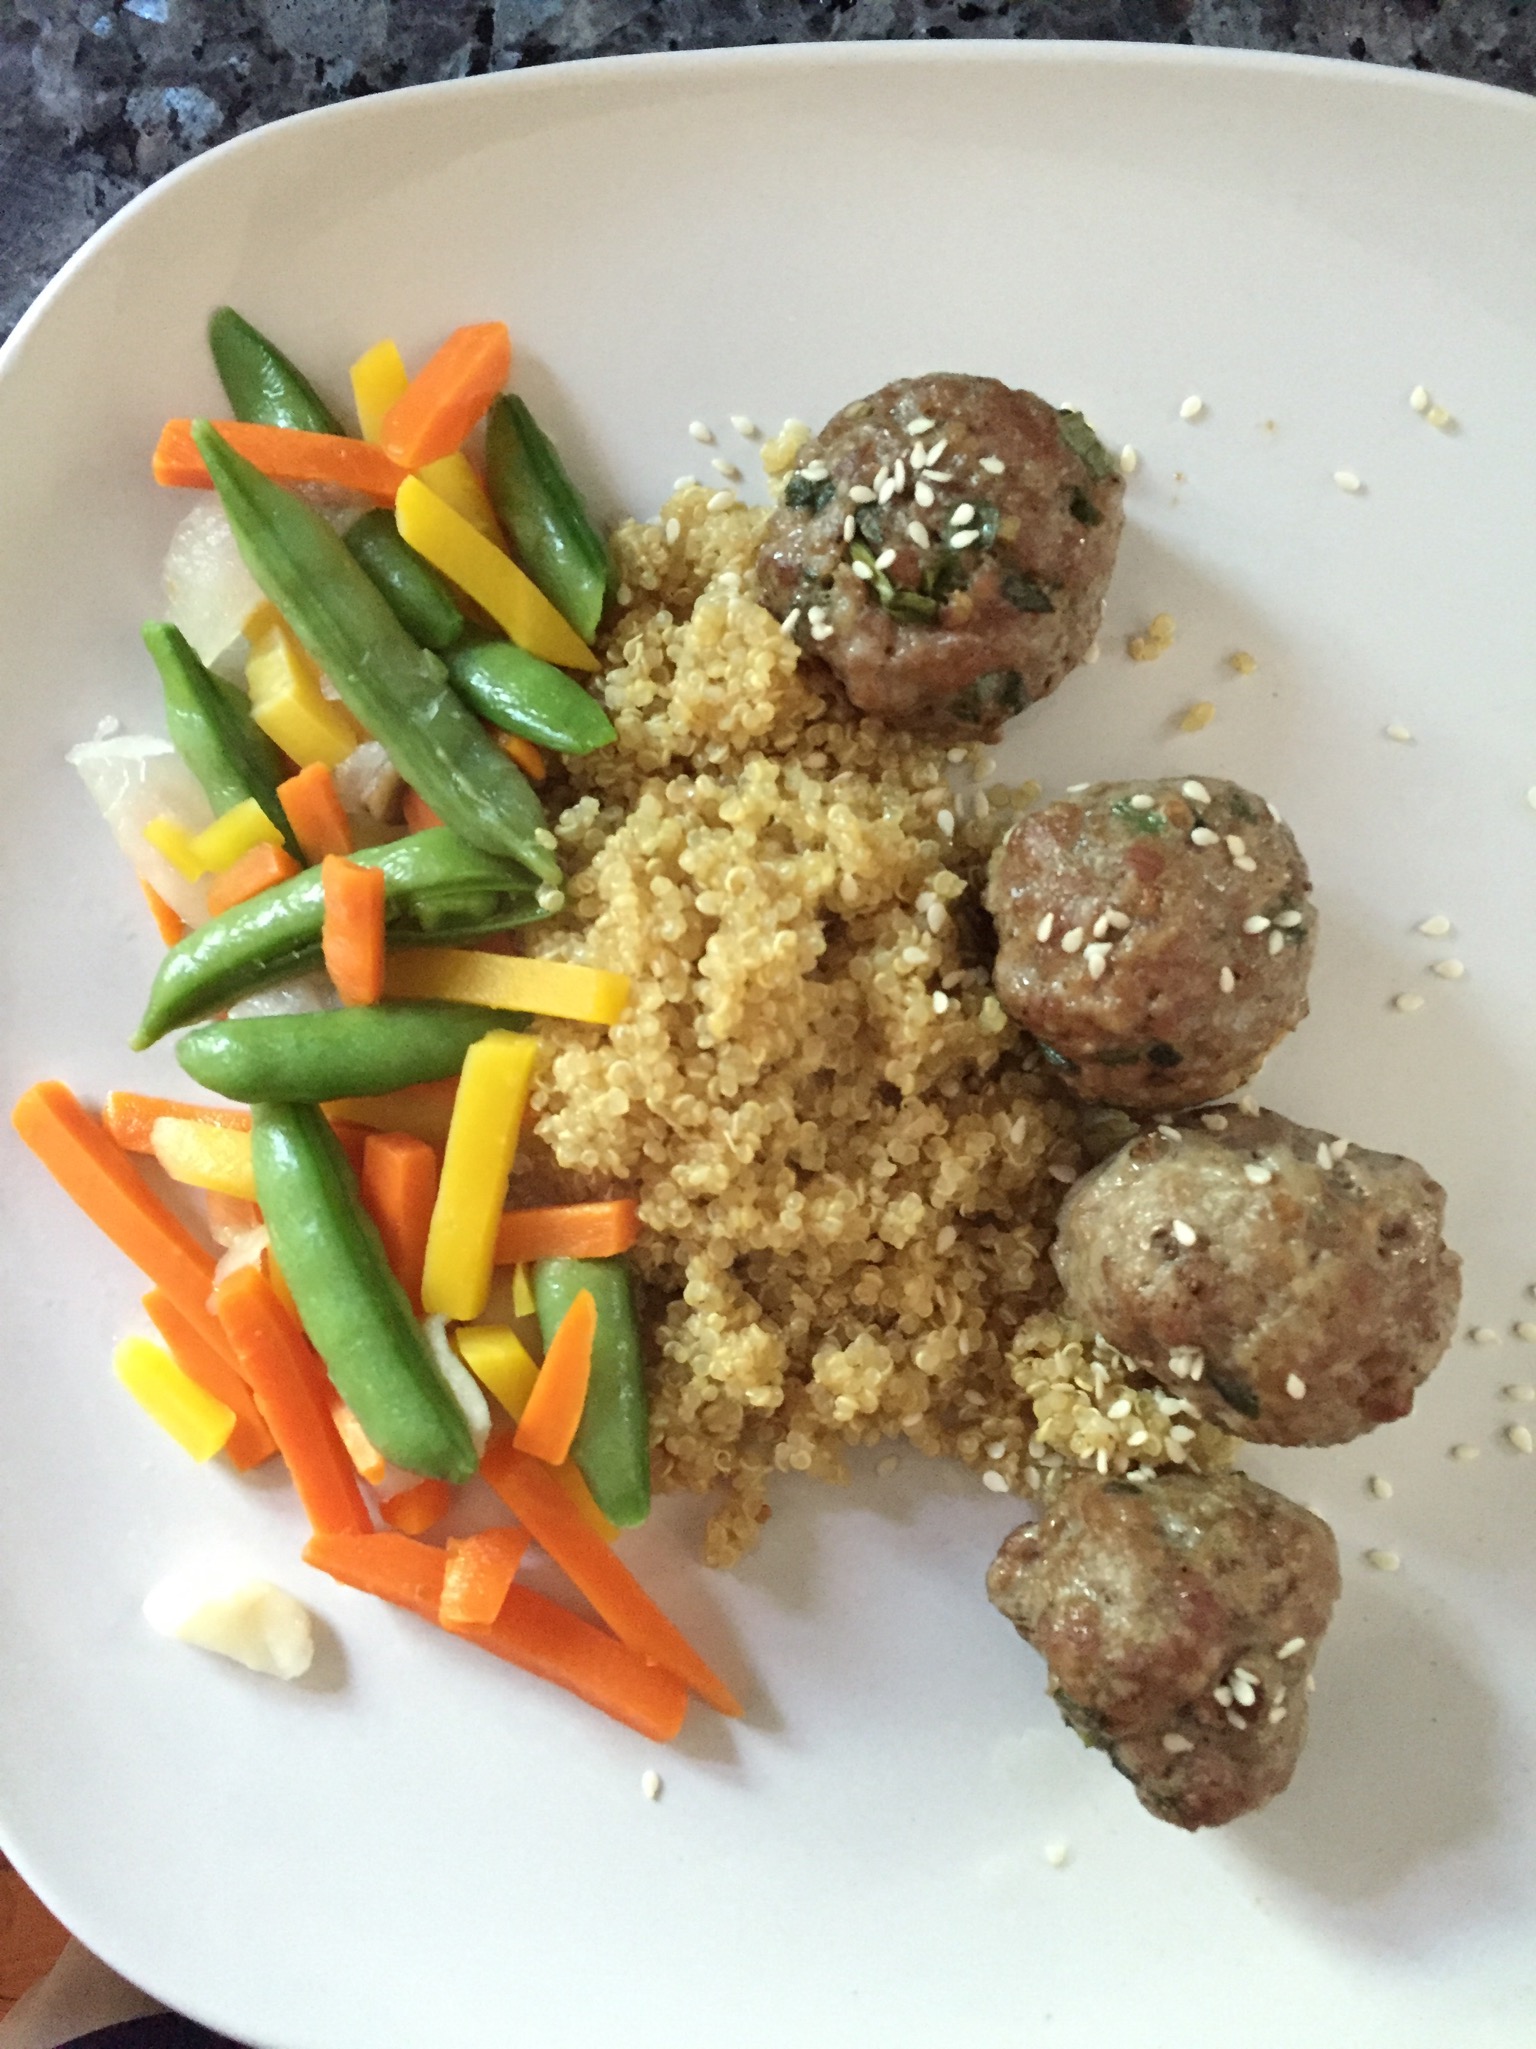 These were a huge family hit! And so easy to make. We served our Asian meatballs with a pepper stir fry mix. I froze the leftovers for a quick reheat later.